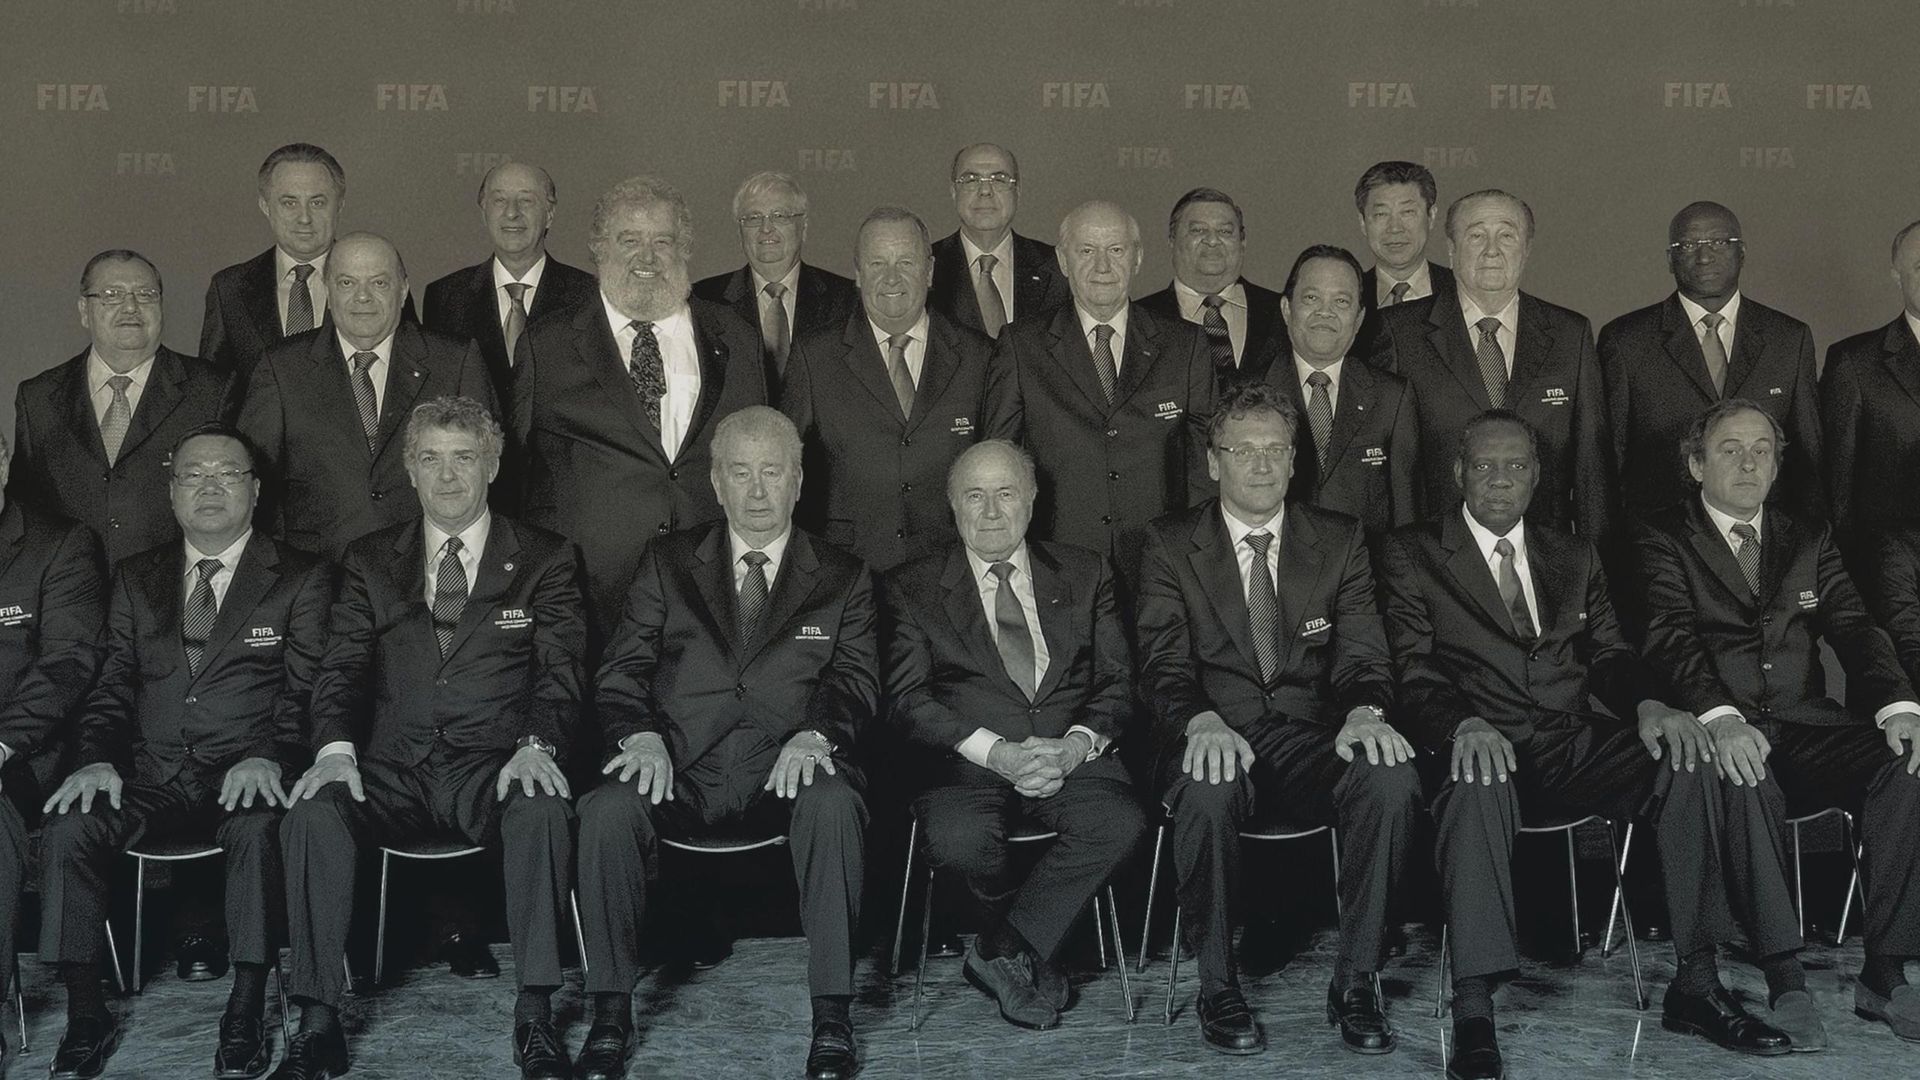 FIFA Uncovered background